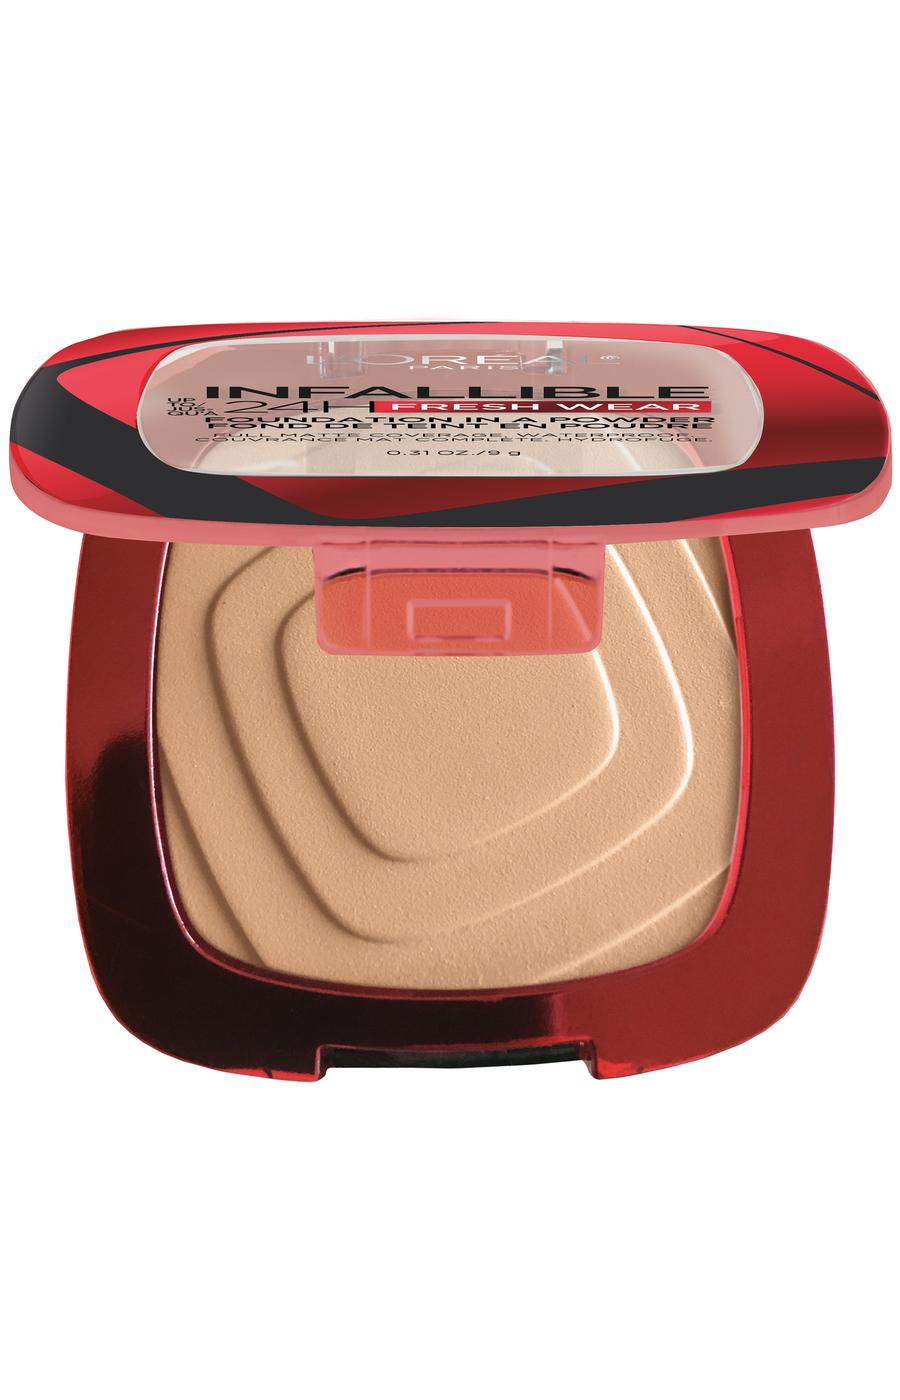 L'Oréal Paris Infallible Up to 24H Fresh Wear Foundation in a Powder Radiant Honey; image 2 of 4